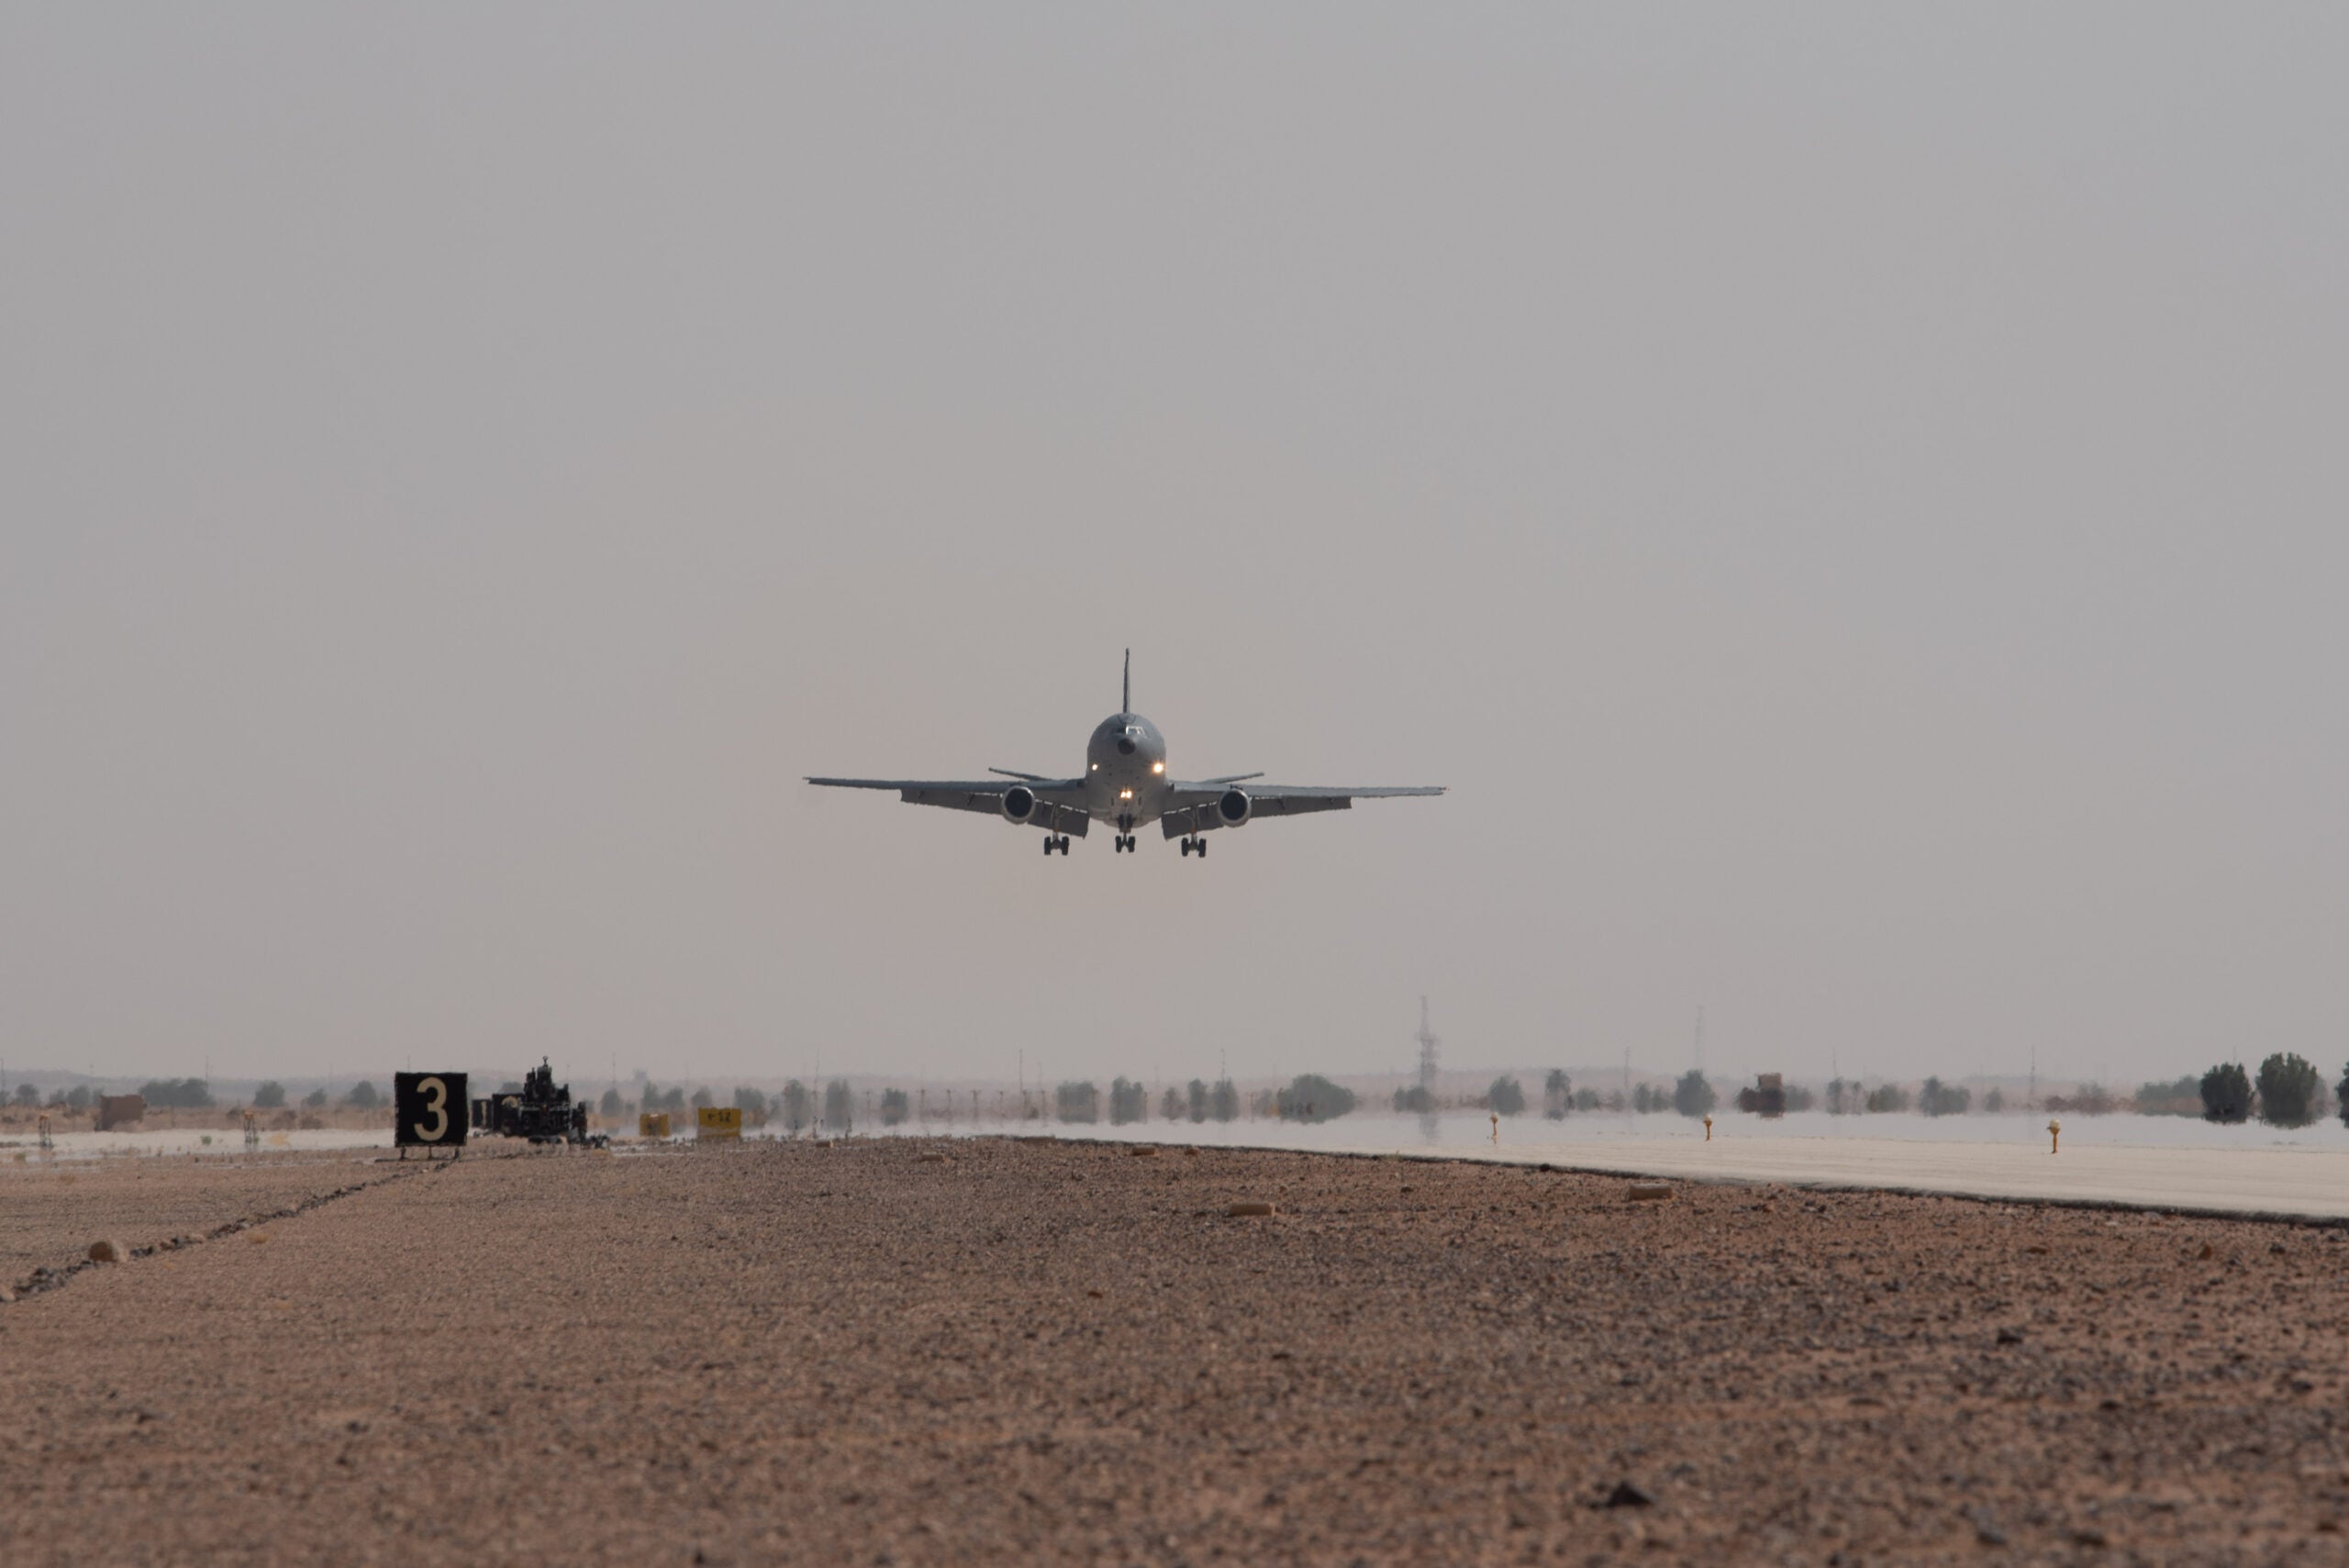 A KC-10 Extender assigned to the 908th Air Refueling Squadron begins landing after conducting the airframe's final combat sortie before inactivation at Prince Sultan Air Base, Kingdom of Saudi Arabia, Oct. 3, 2023. The flight served as a capstone for the KC-10 after over 30 years of service within the U.S. Air Forces Central (AFCENT) Area of Responsibility. By September 2024, the U.S. Air Force's fleet of KC-10s will be decommissioned and gradually replaced by the KC-46 aircraft. (U.S. Air Force photo by Tech. Sgt. Alexander Frank)